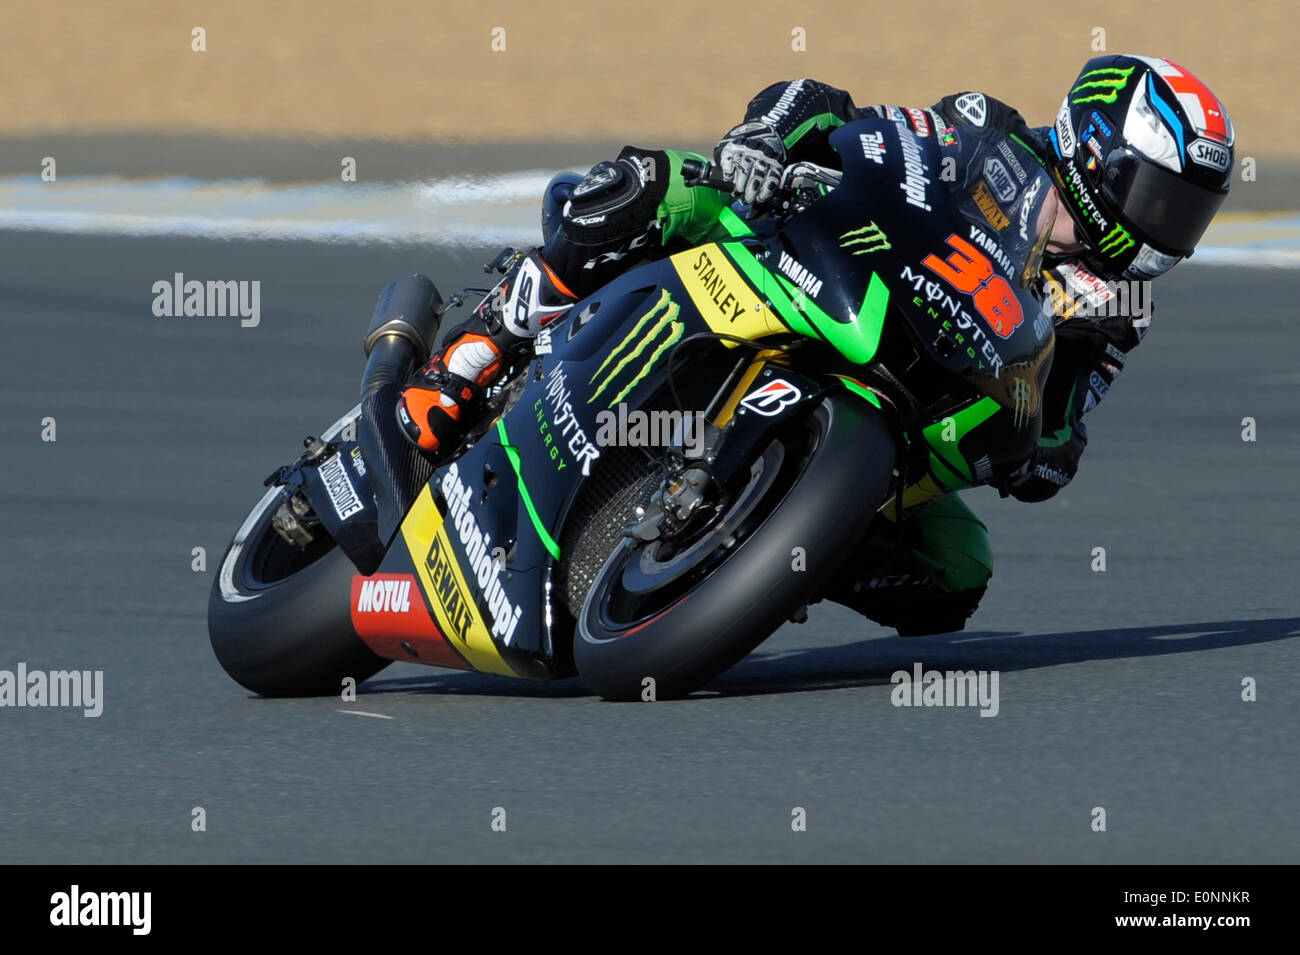 Le Mans, France. 17th May, 2014. MotoGP Monster Energy Grand Prix de France,  Qualifying sessions. Bradley Smith (Monster Yamaha tech 3) during the  qualifying sessions at Bugatti circuit in Le Mans Credit: